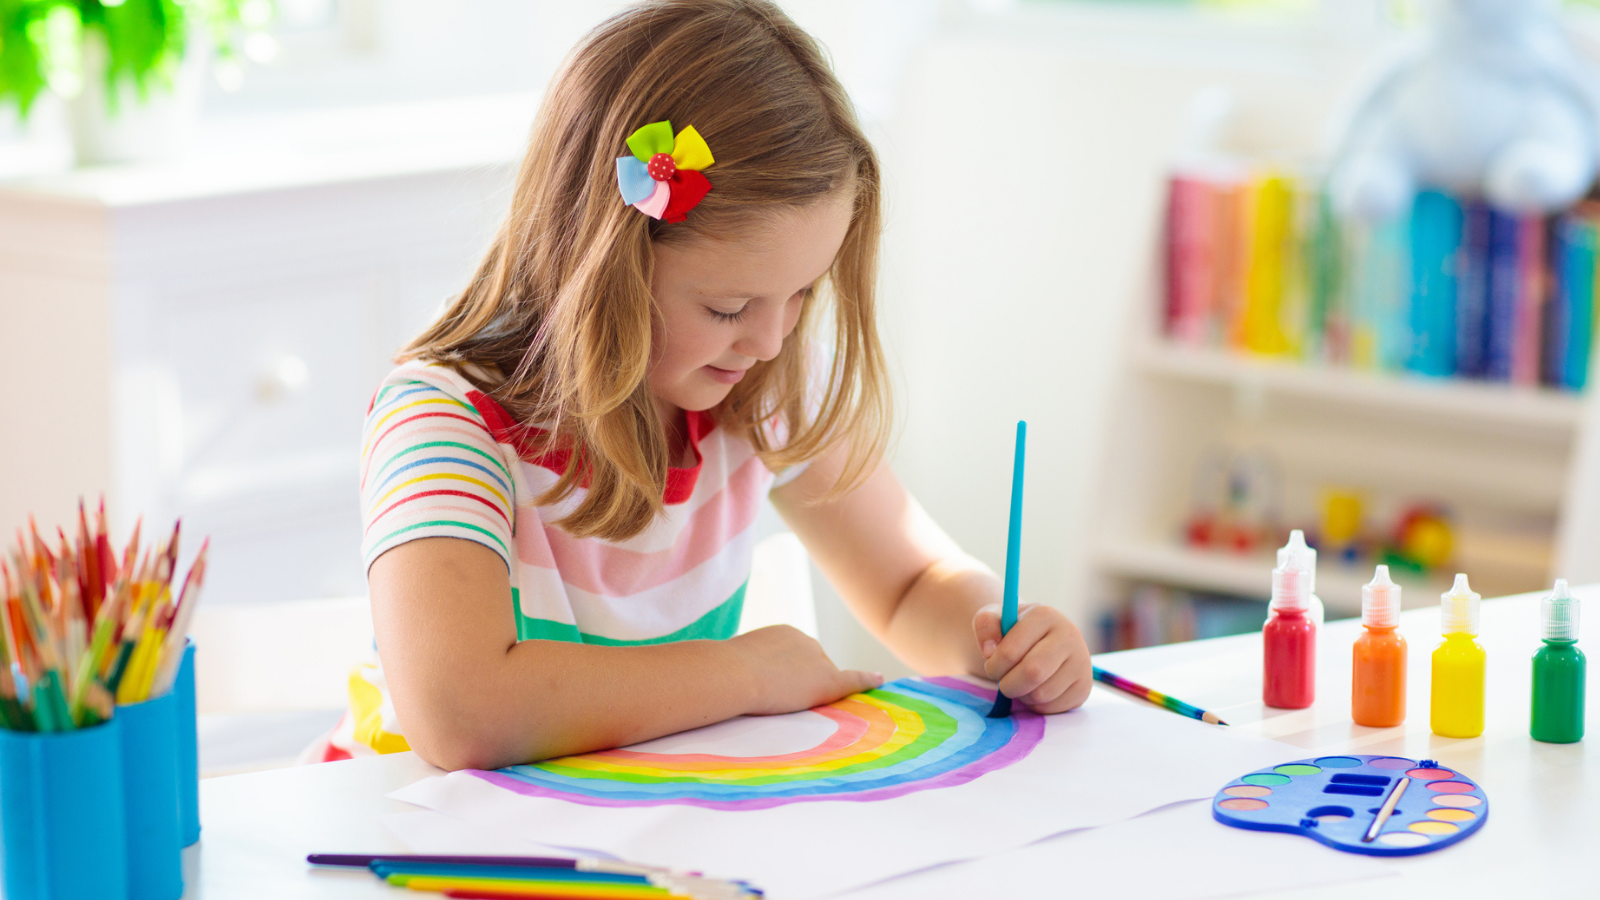 Complete a 30-day art challenge with your kids